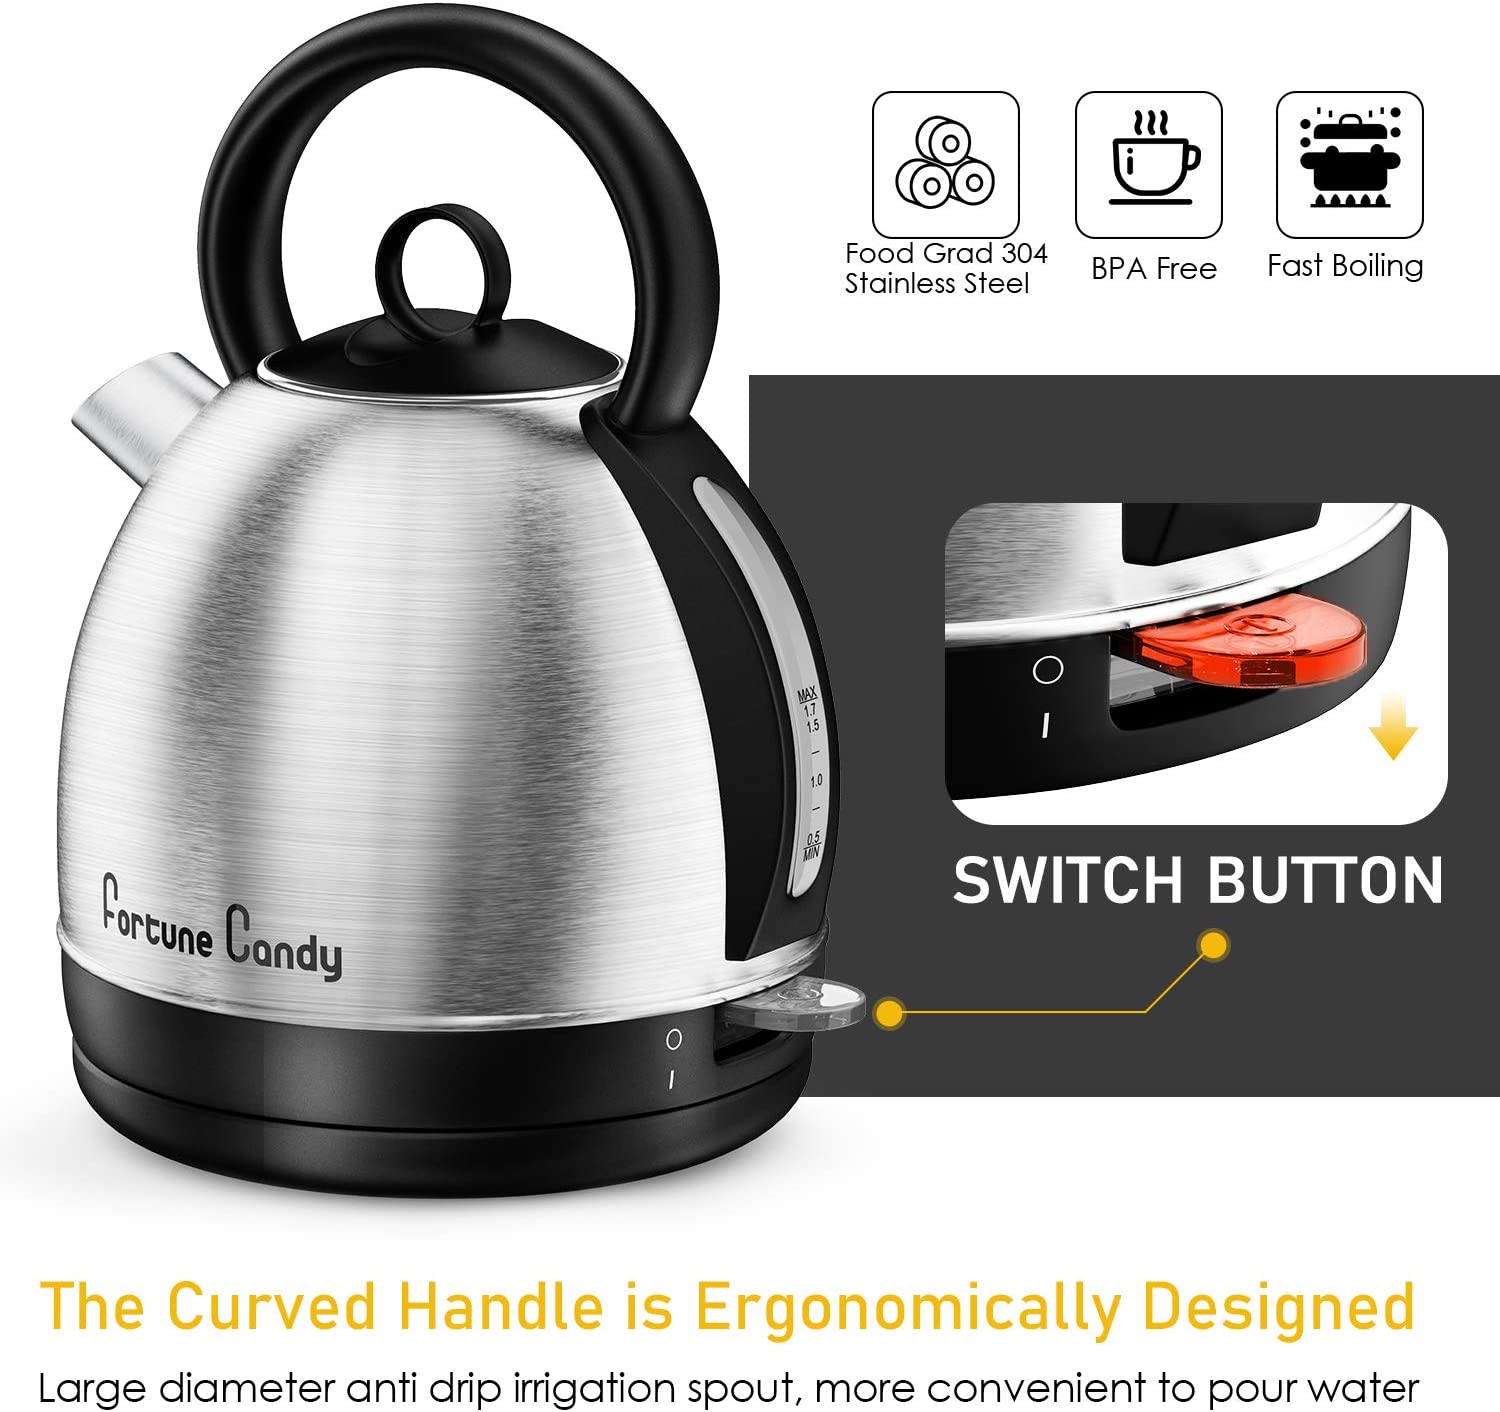 Steel Electric Tea Kettle with Auto Shut-Off and Boil Dry